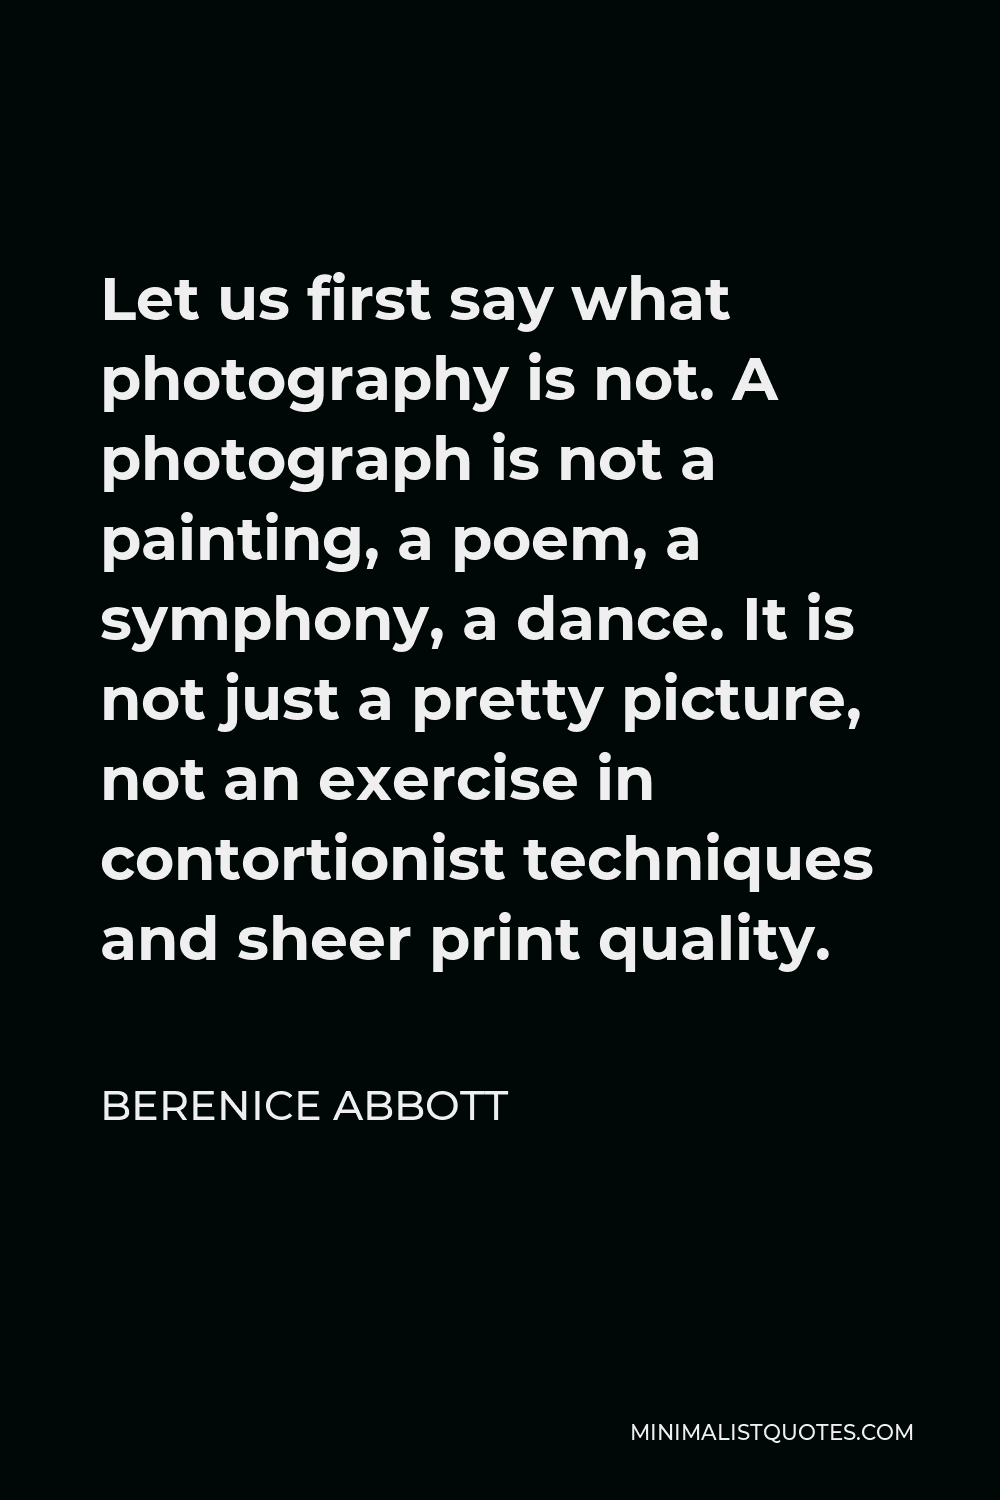 Berenice Abbott Quote - Let us first say what photography is not. A photograph is not a painting, a poem, a symphony, a dance. It is not just a pretty picture, not an exercise in contortionist techniques and sheer print quality.